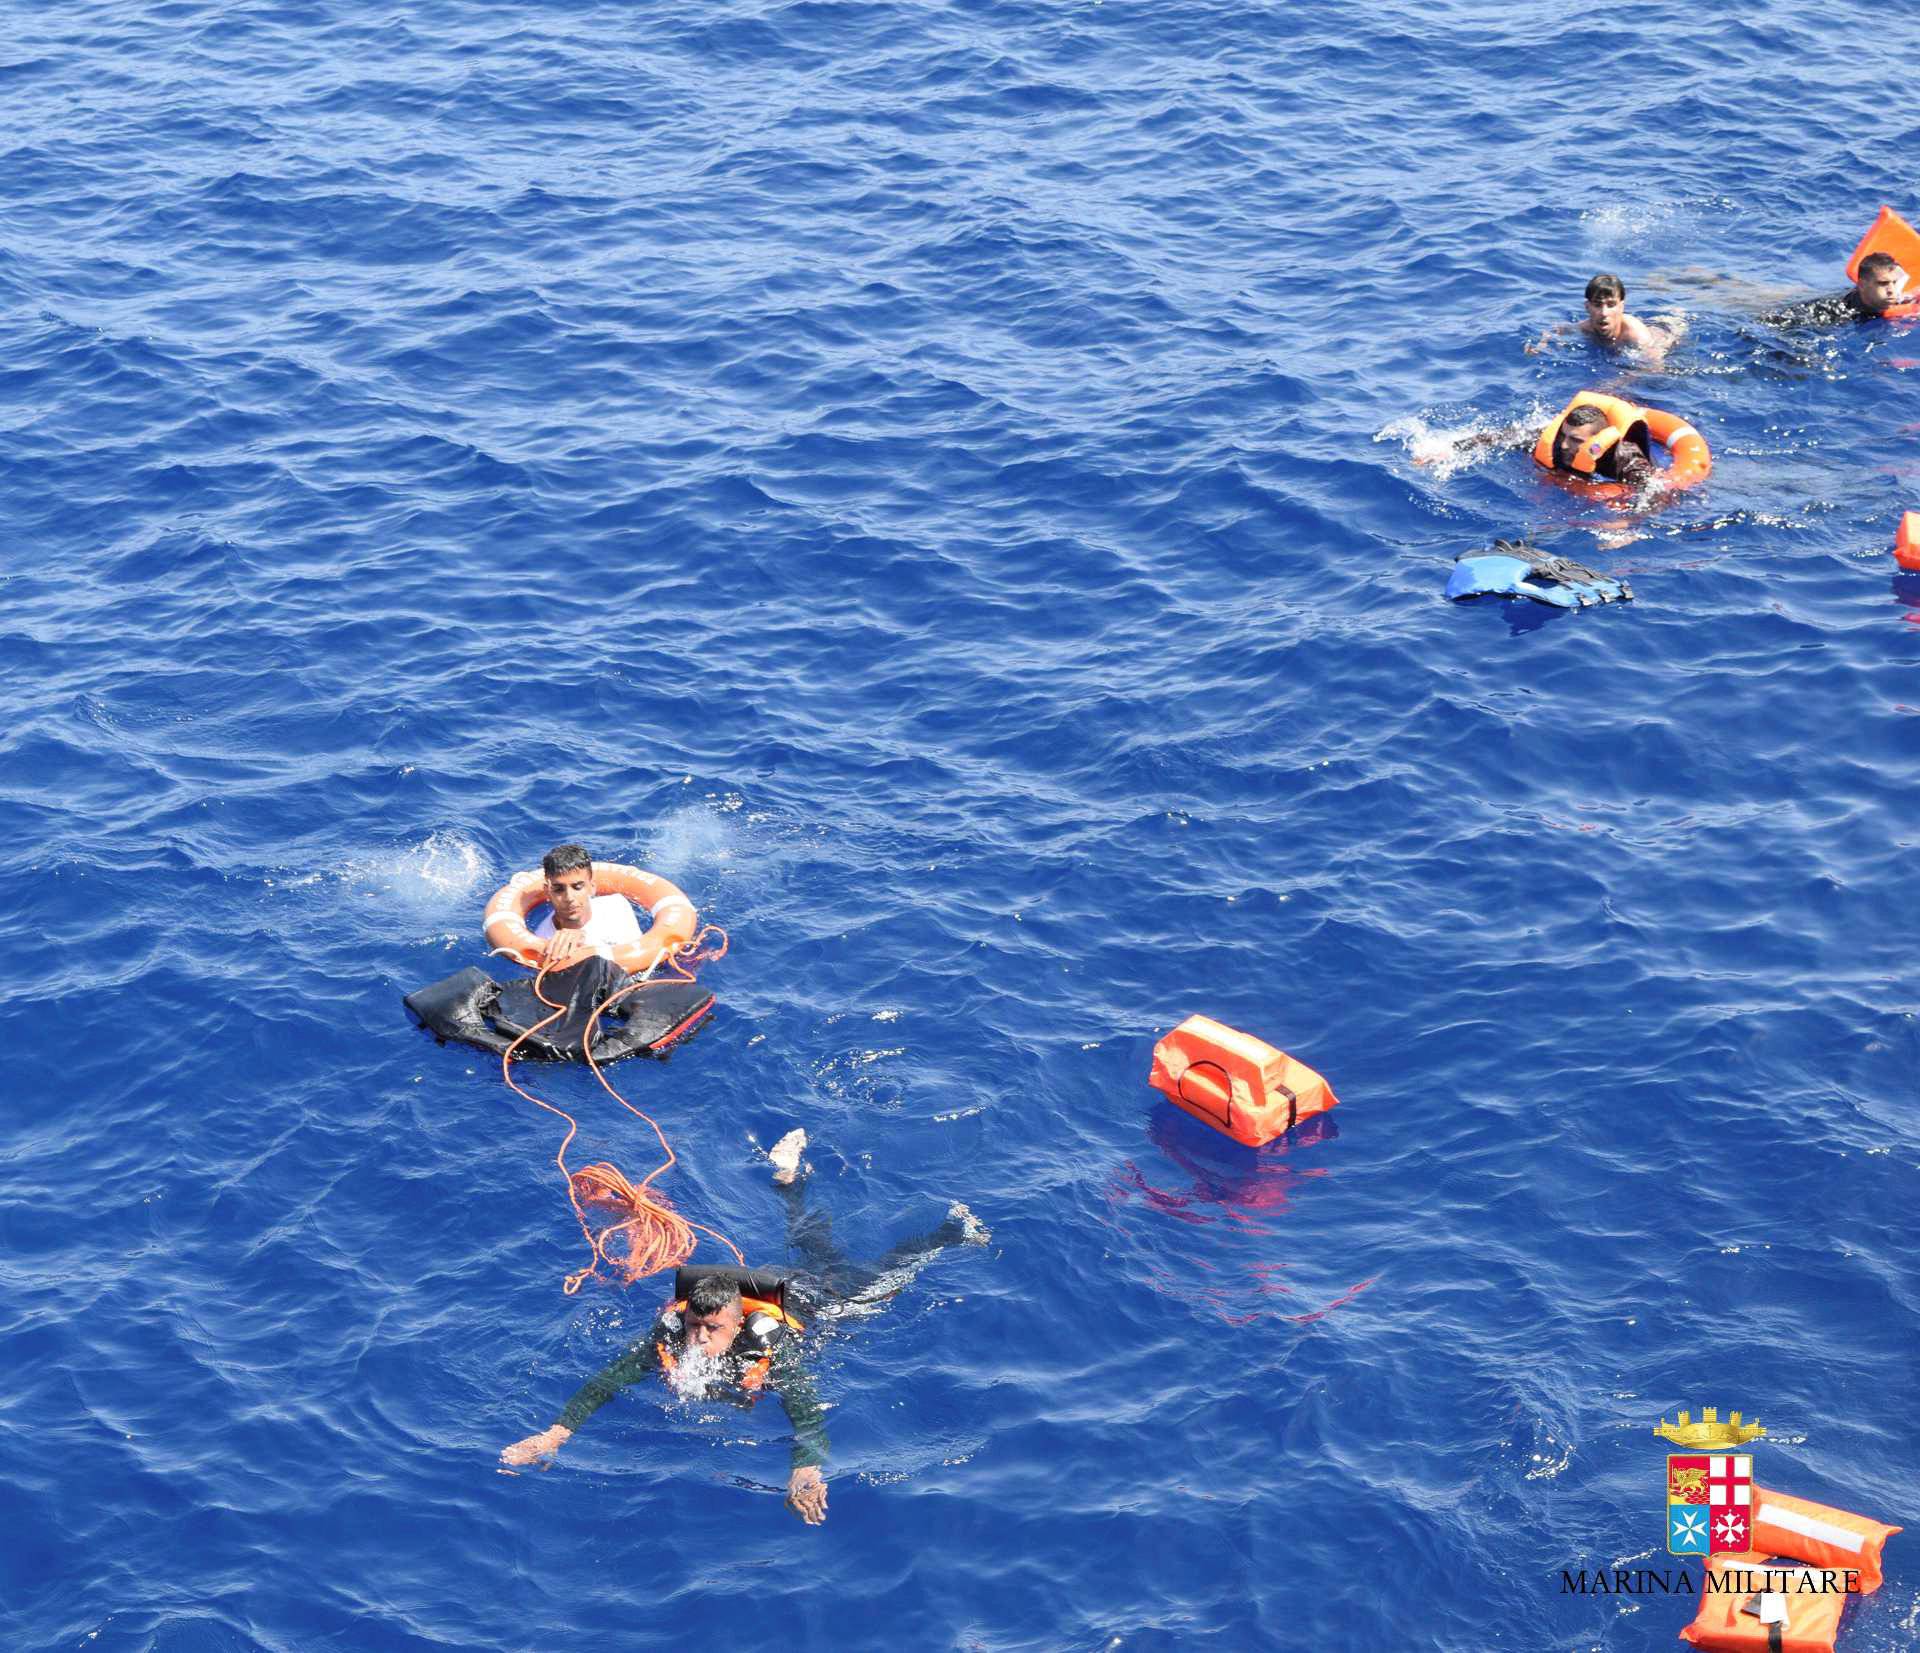 Migrants from a capsized boat are rescued during a rescue operation by Italian navy ships "Bettica" and "Bergamini" (unseen) off the coast of Libya